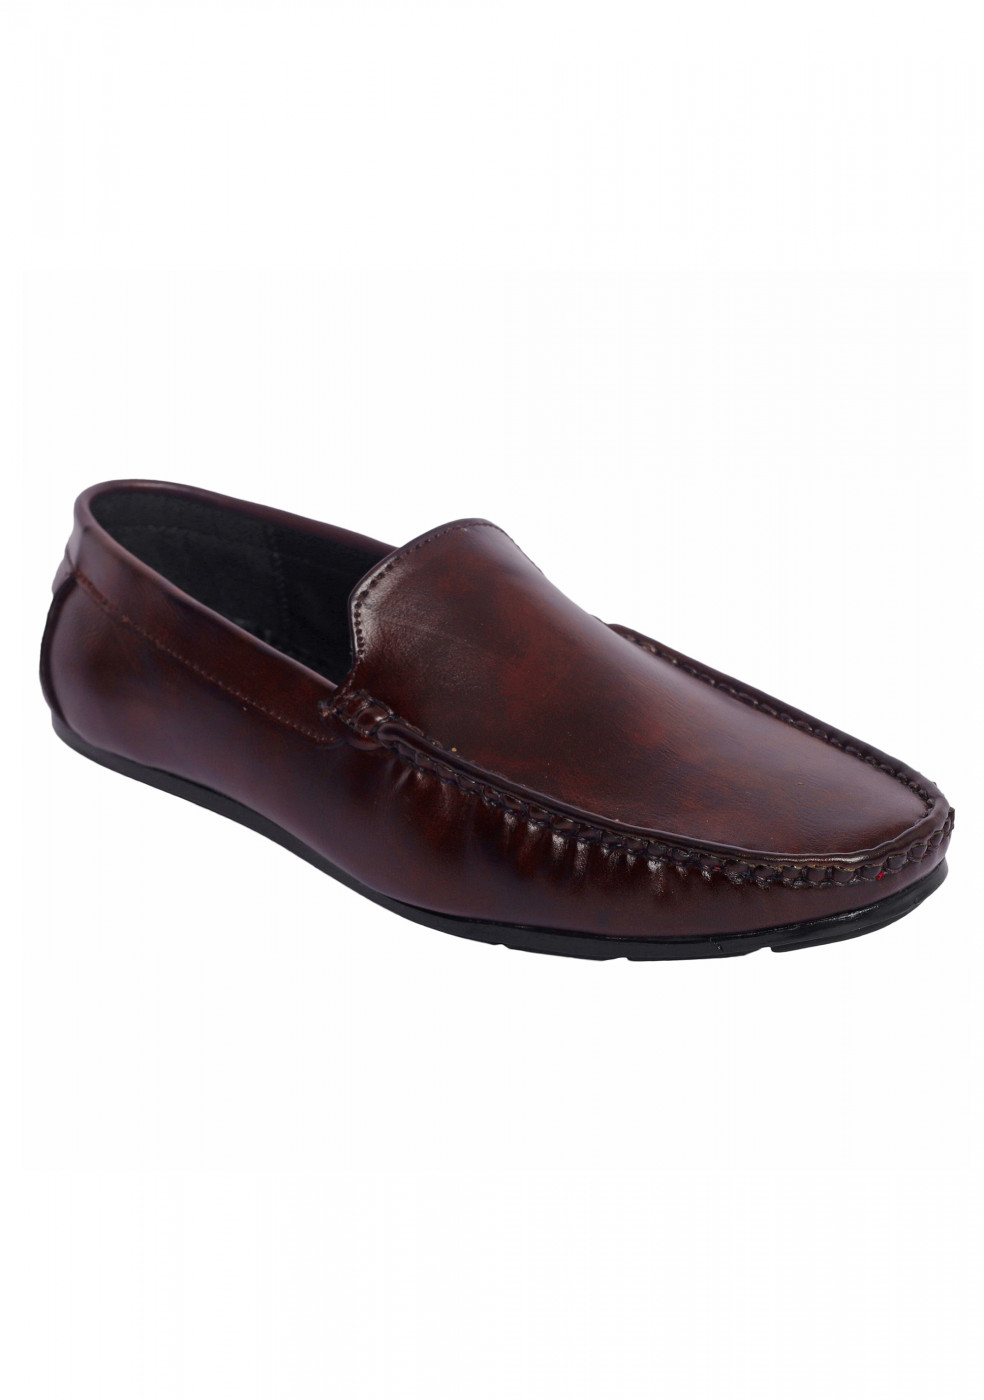 XSTOM Loafers Brown For Men